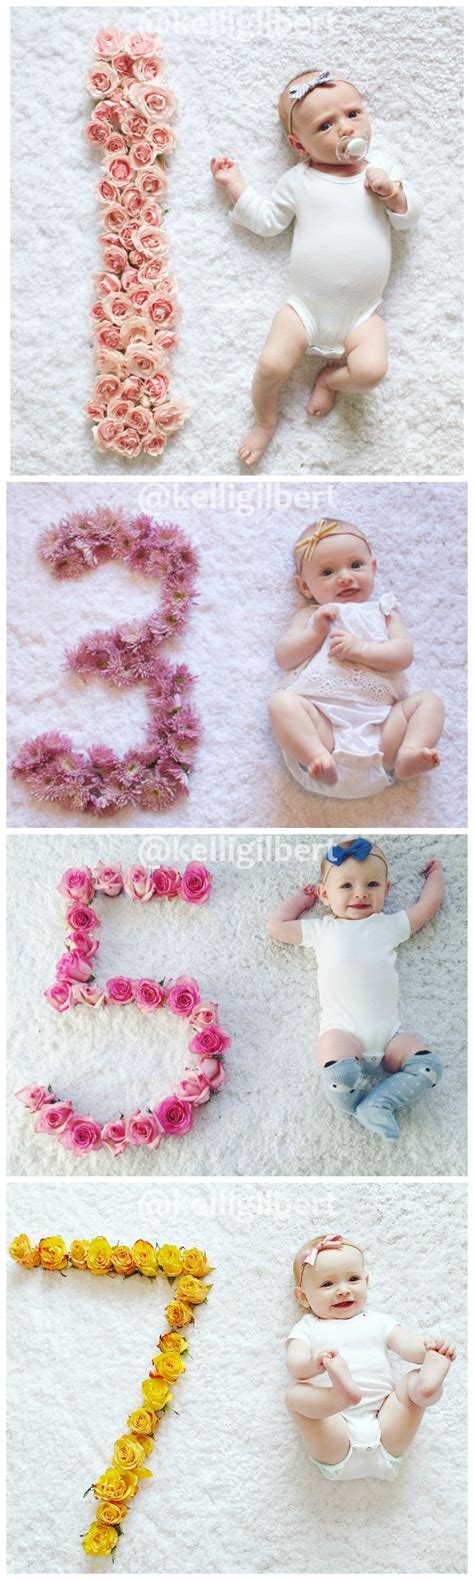 Try These Monthly Baby Photo Ideas If Youre A First Time Mom